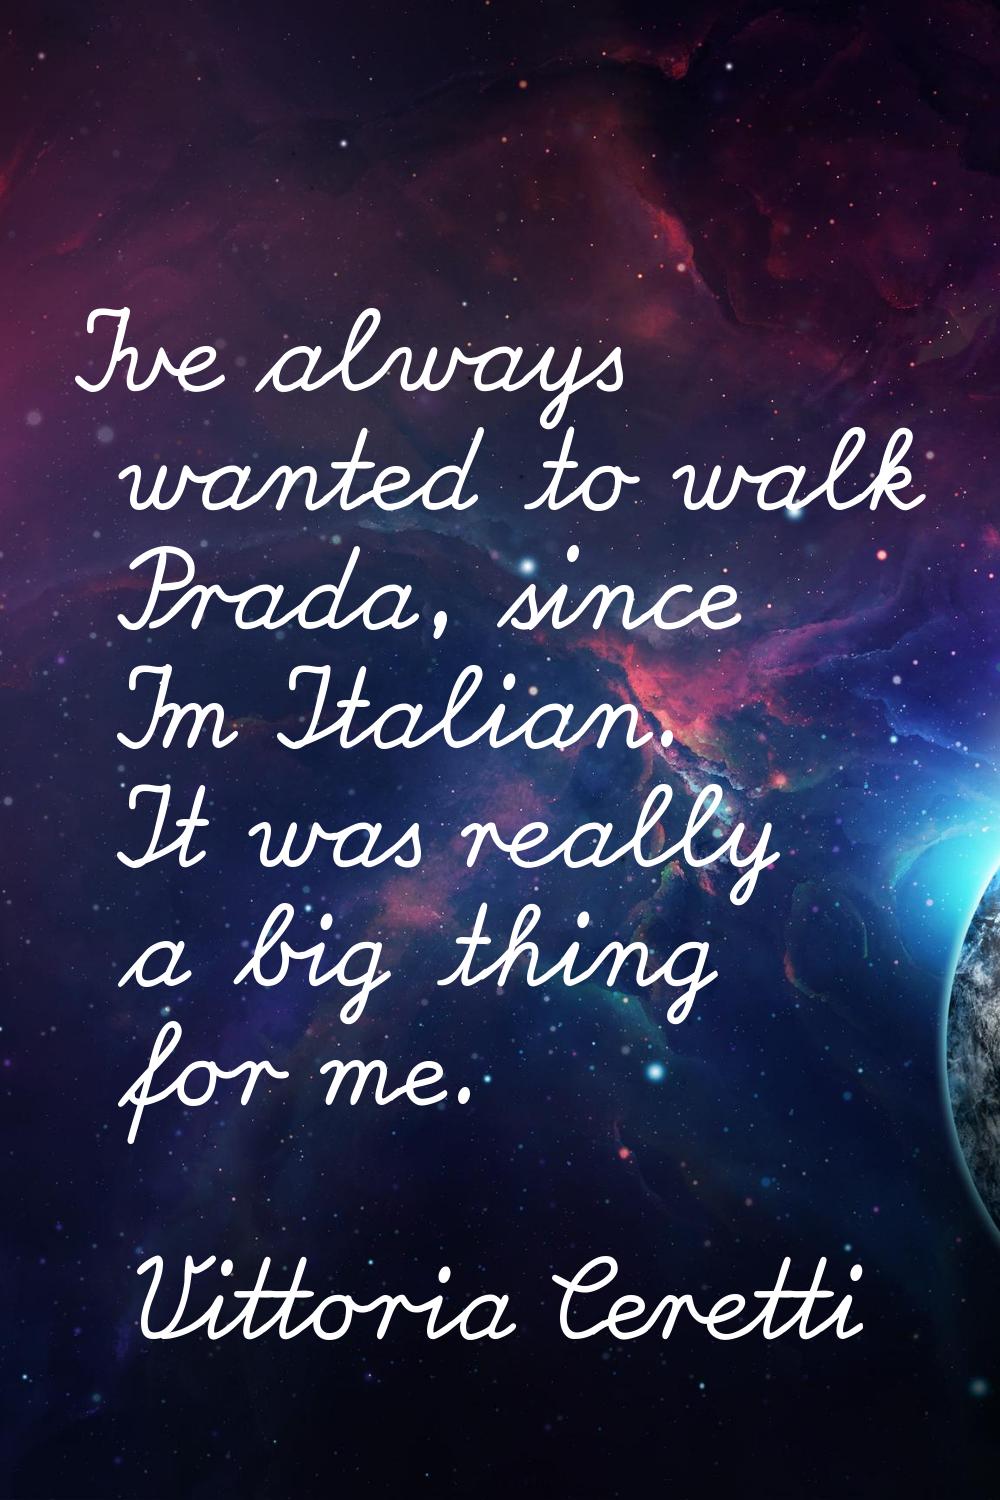 I've always wanted to walk Prada, since I'm Italian. It was really a big thing for me.